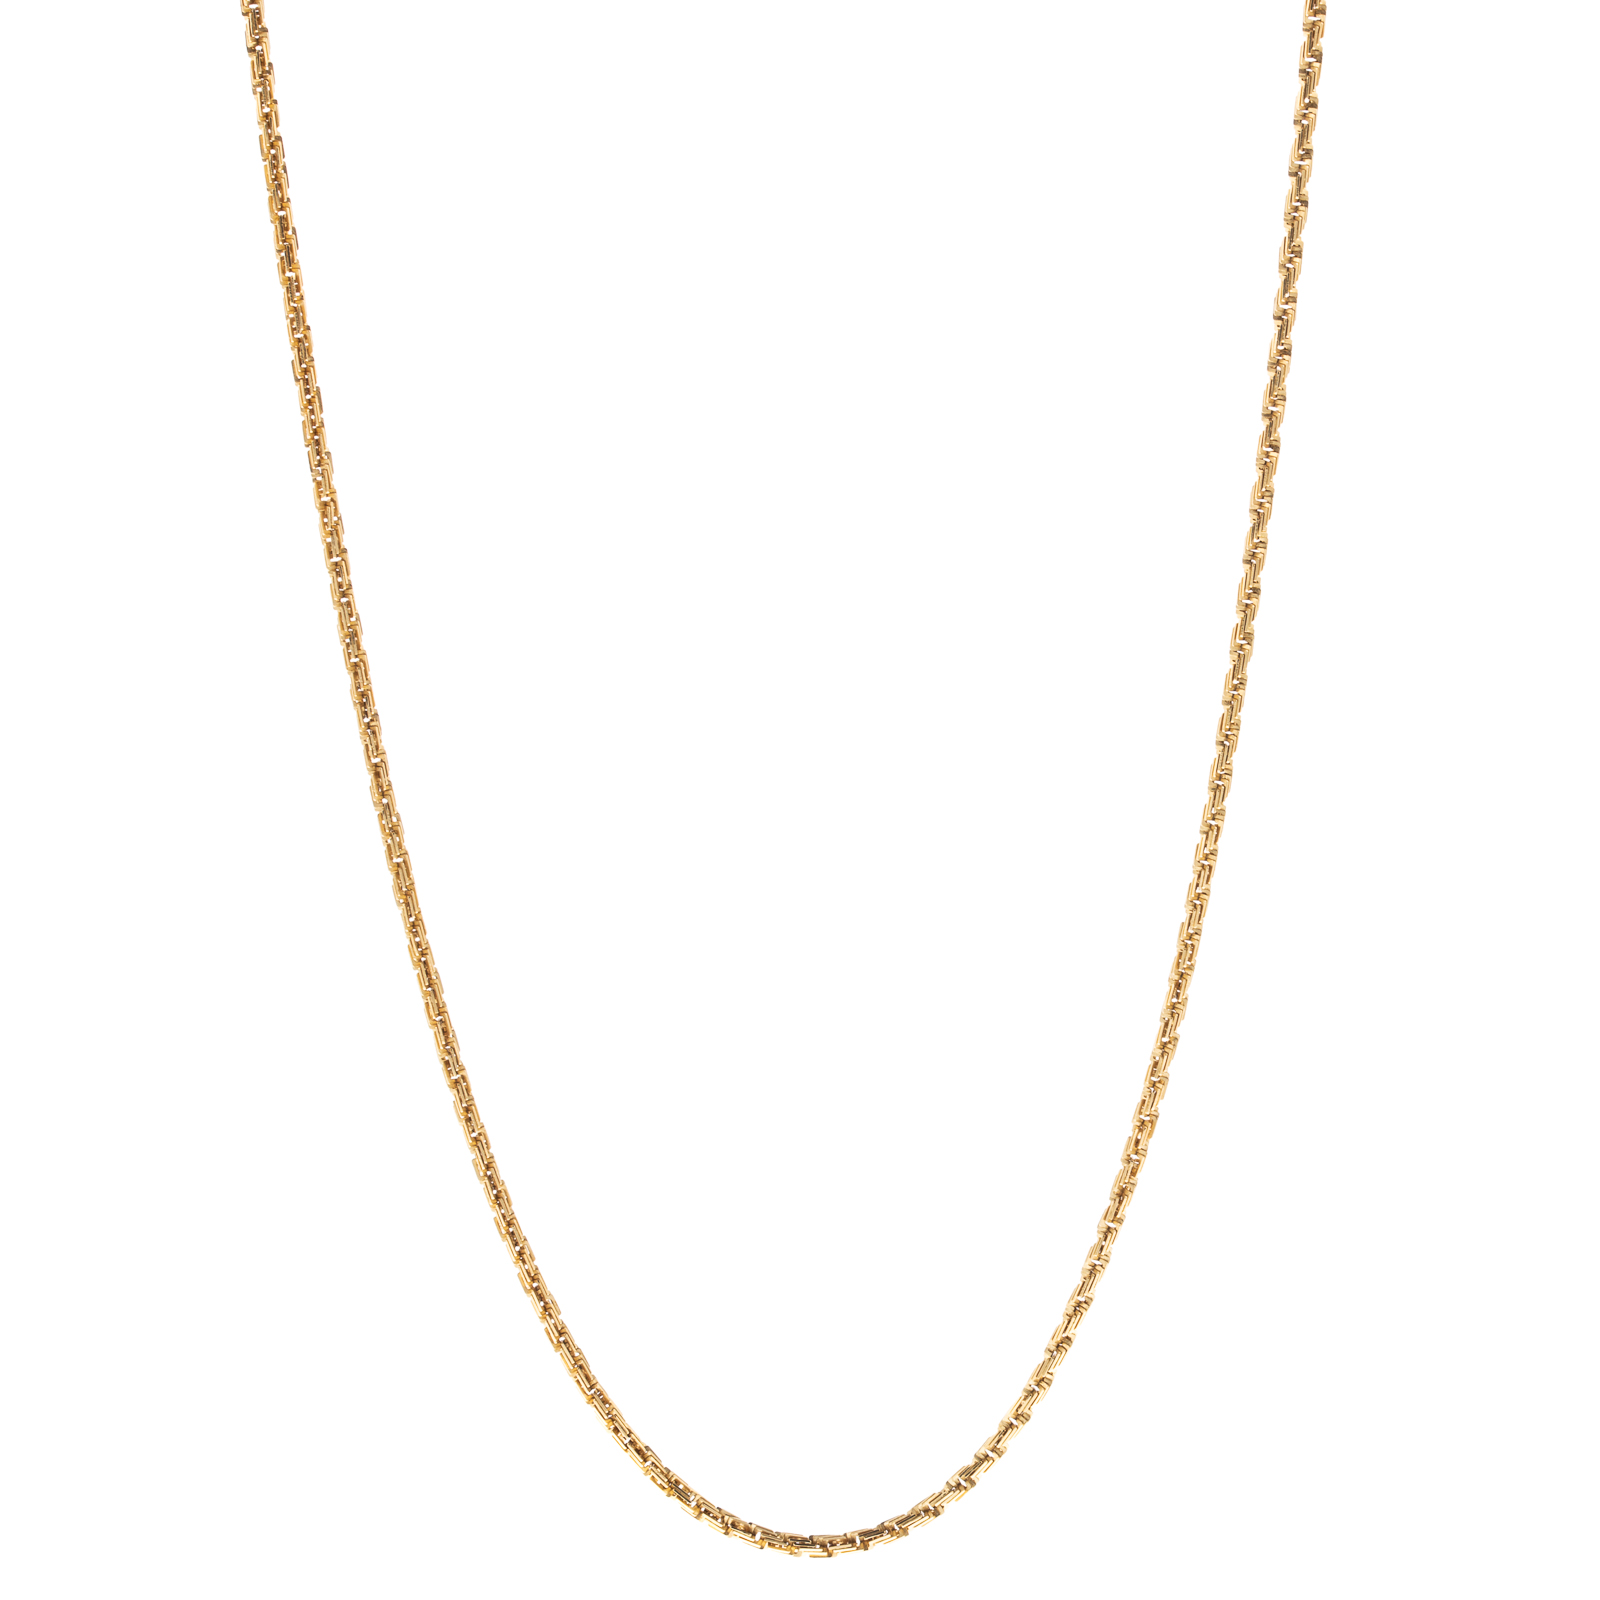 A HEAVY 14K ROPE CHAIN NECKLACE